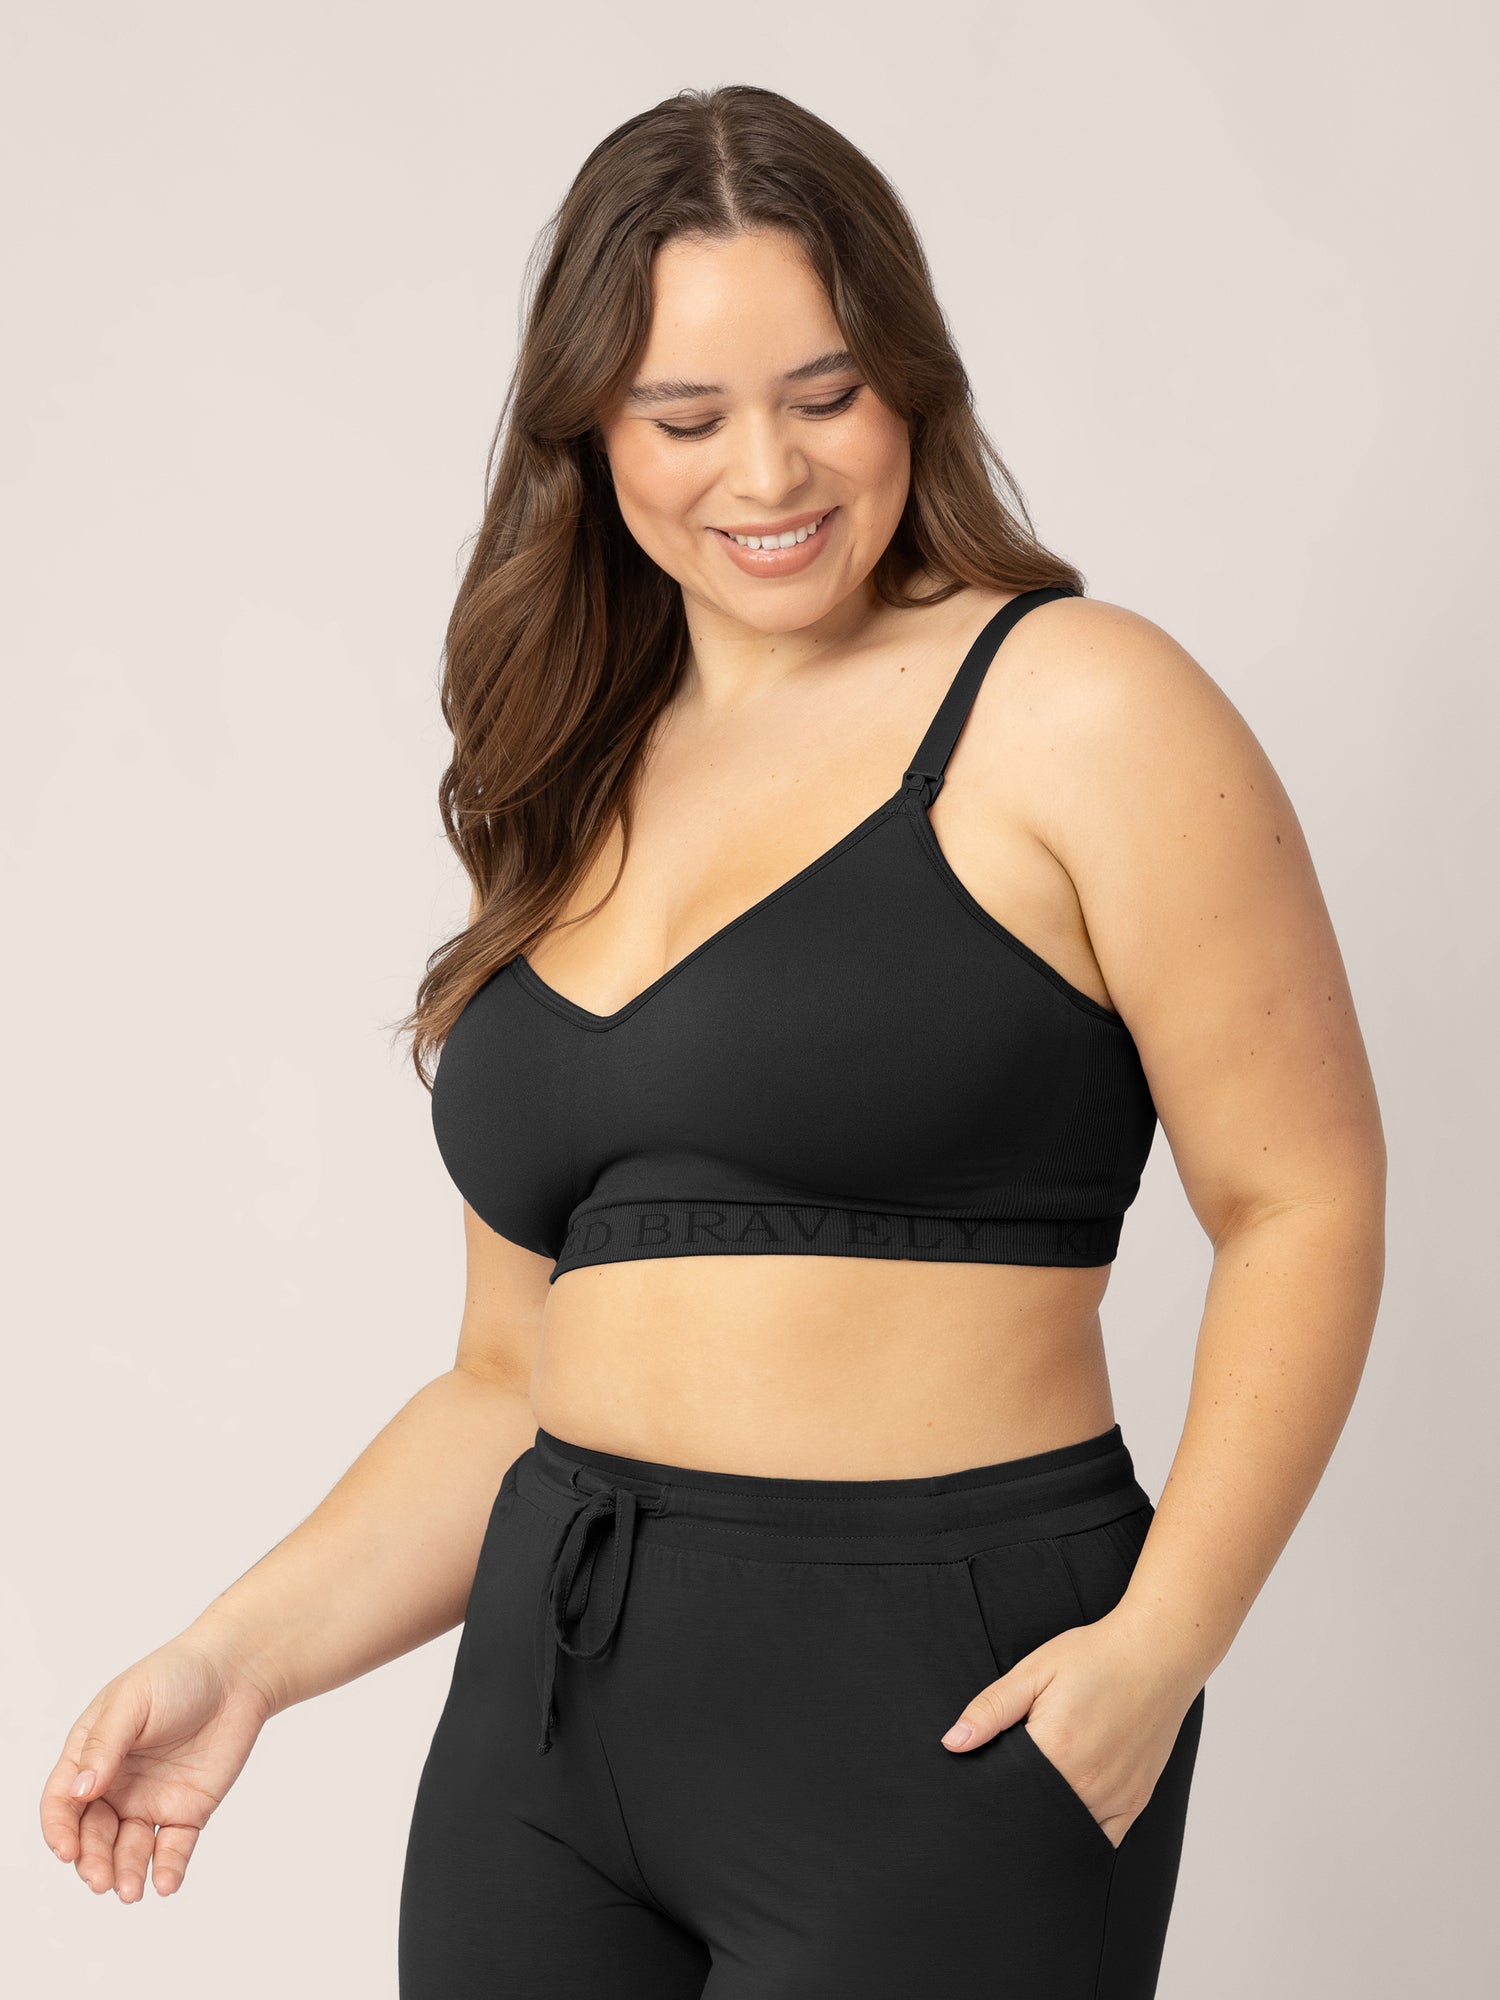 Busty model wearing the Signature Sublime® Contour Maternity & Nursing Bra in Black with one hand in her pocket. 